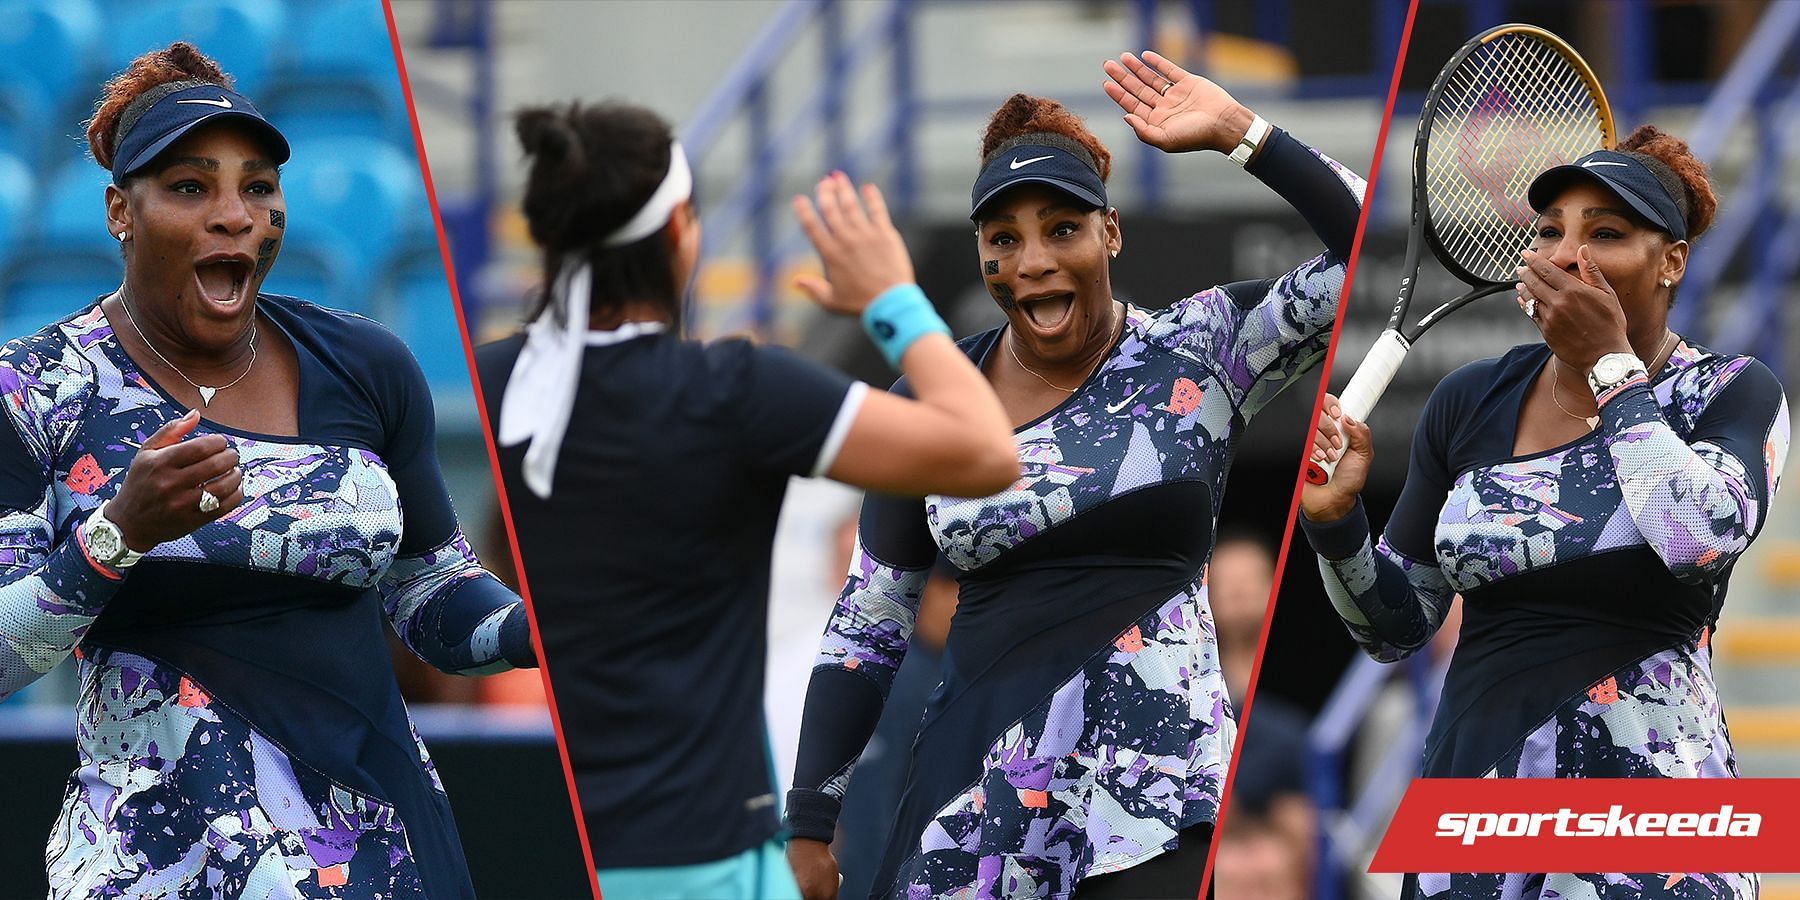 Serena Williams and partner Ons Jabeur won their doubles match in Eastbourne on Tuesday